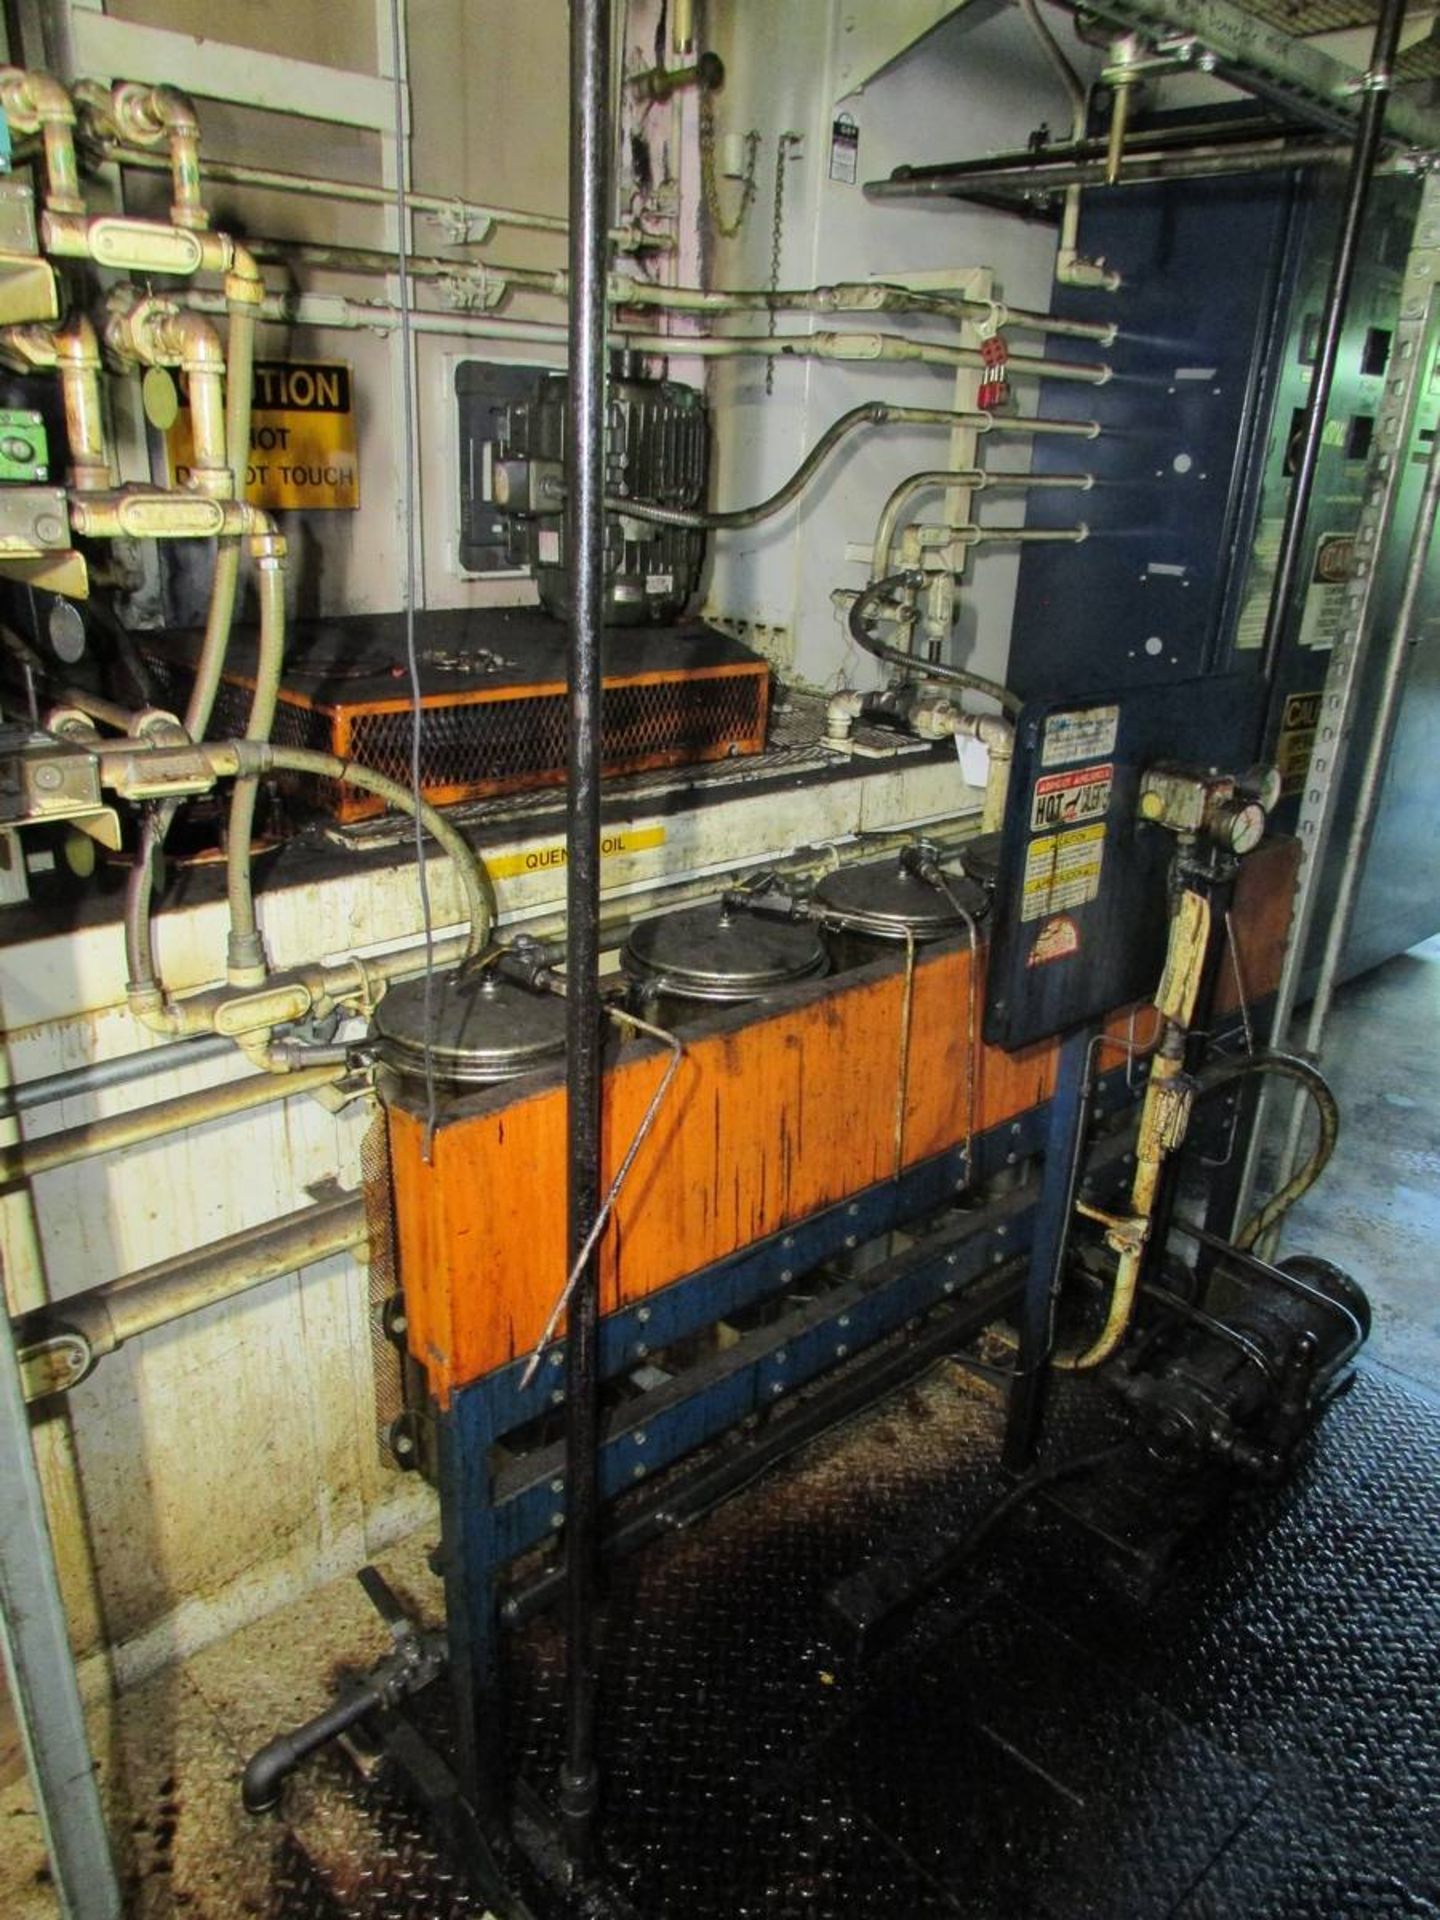 AFC-PIFCO-TA Natural Gas Batch Carburize Quenching Furnace - Image 13 of 22